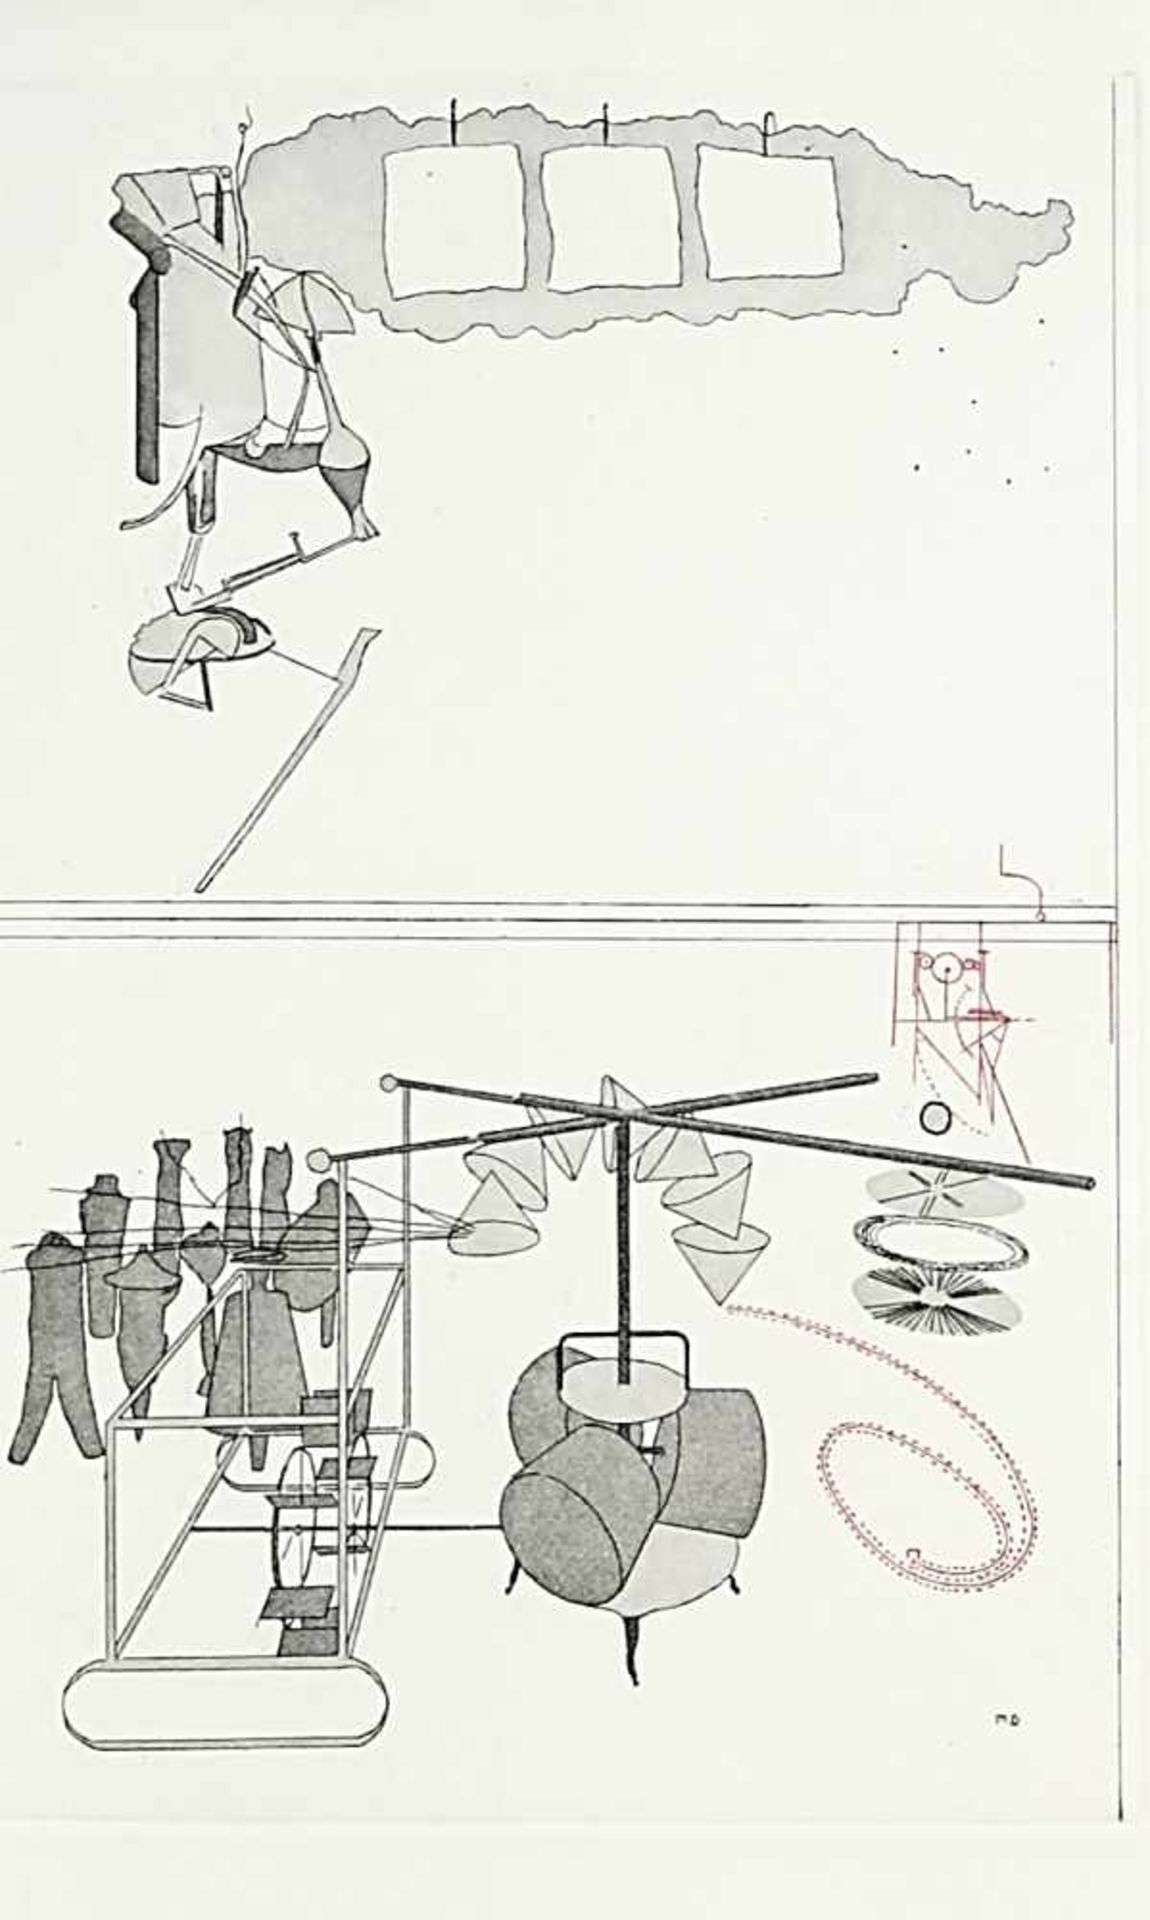 Marcel Duchamp (1887-1968) and Arturo Schwarz (* 1924), ''The Large Glass and Related